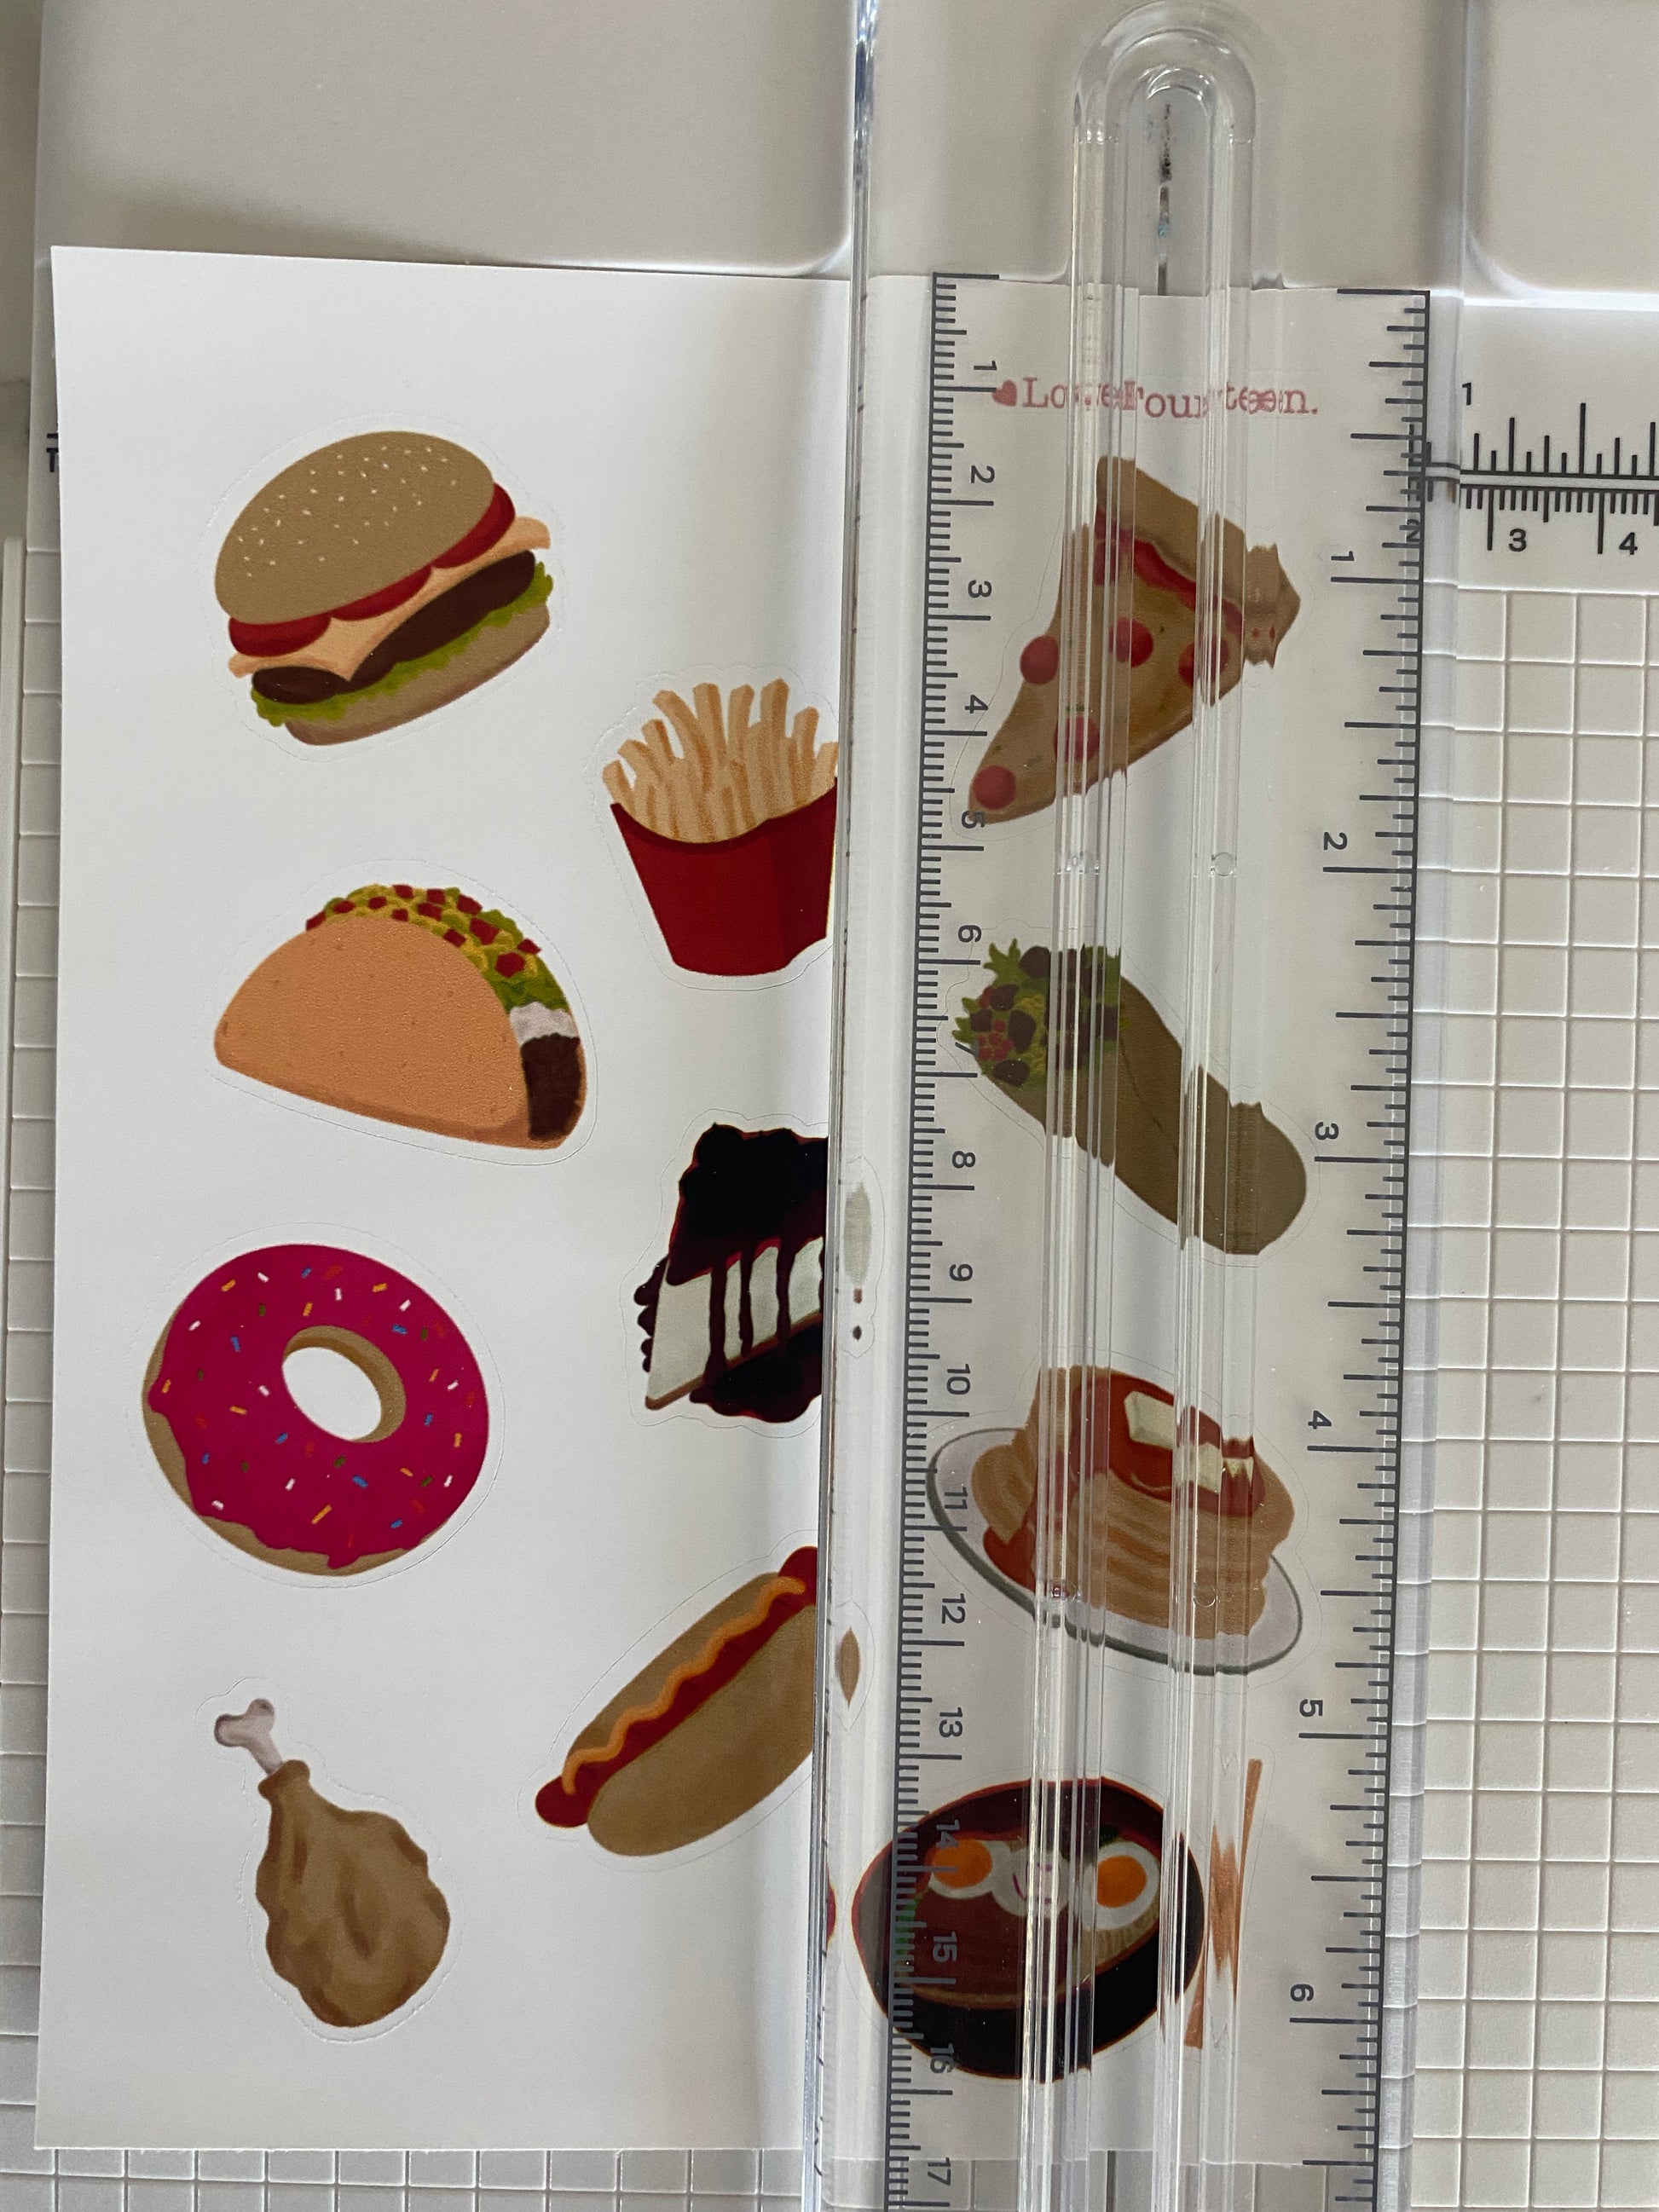 Showing the comfort journal sticker with a ruler to show the overall length of the sticker sheet